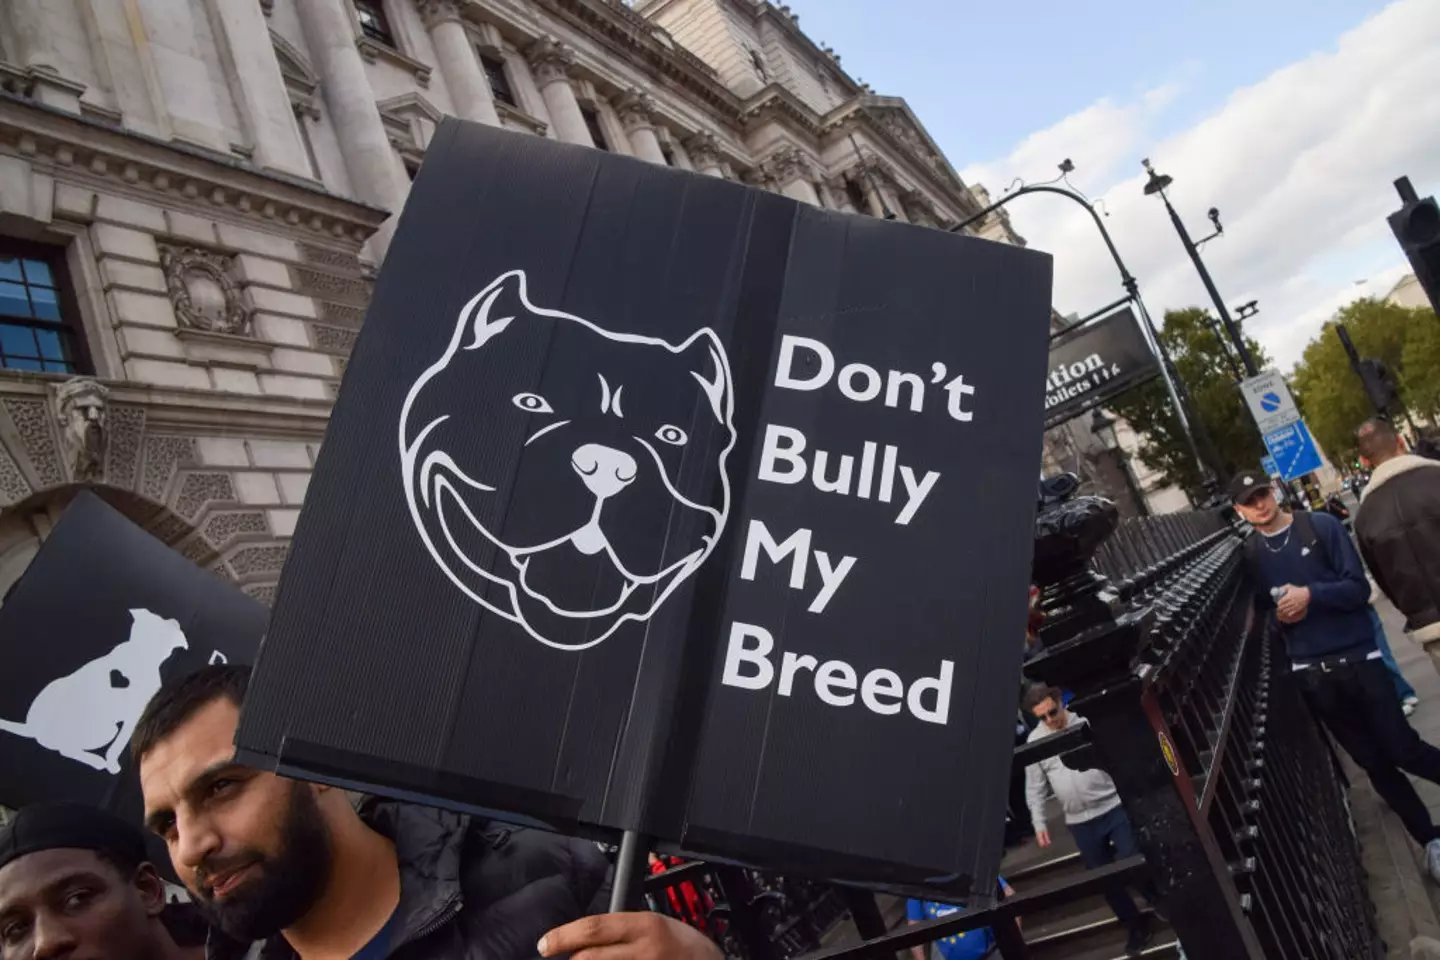 Protests have been held against the XL bully ban.